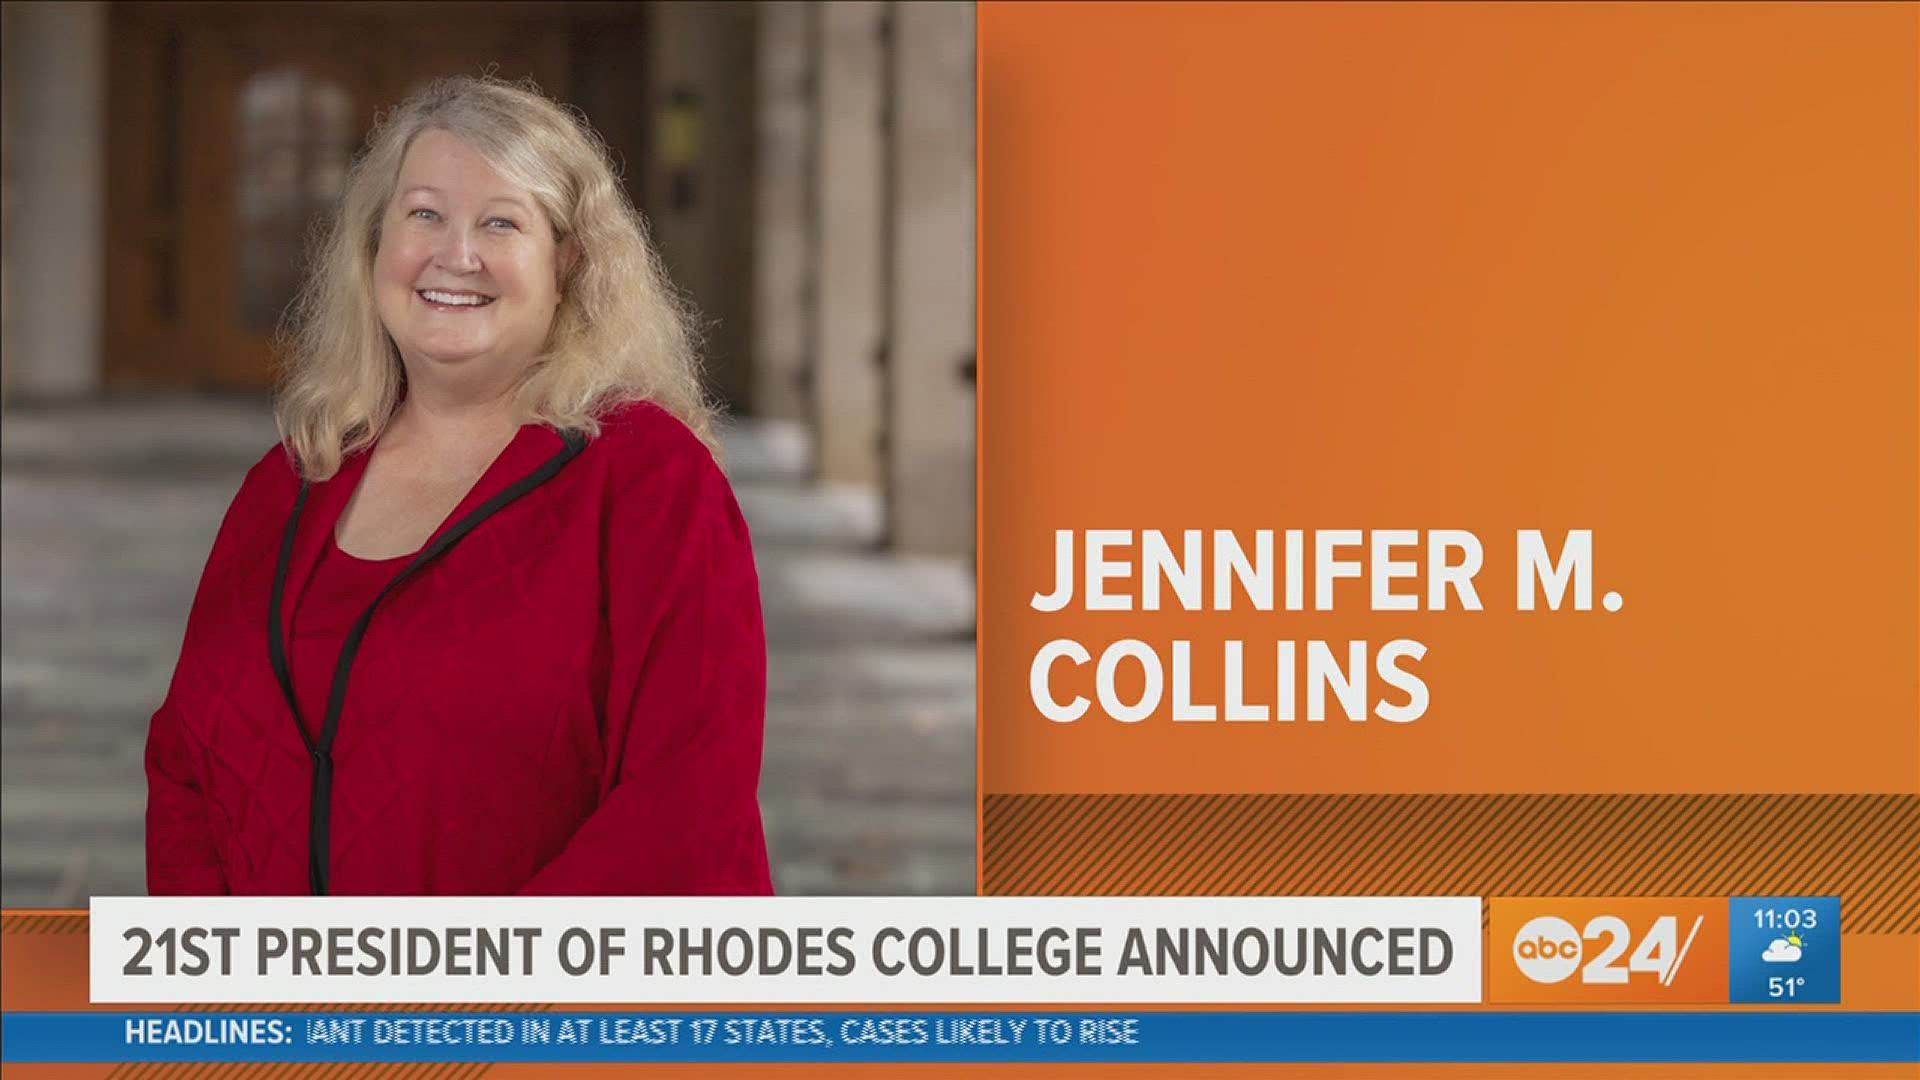 Jennifer Collins is currently the Judge James Noel Dean and law professor at Southern Methodist University in Texas.